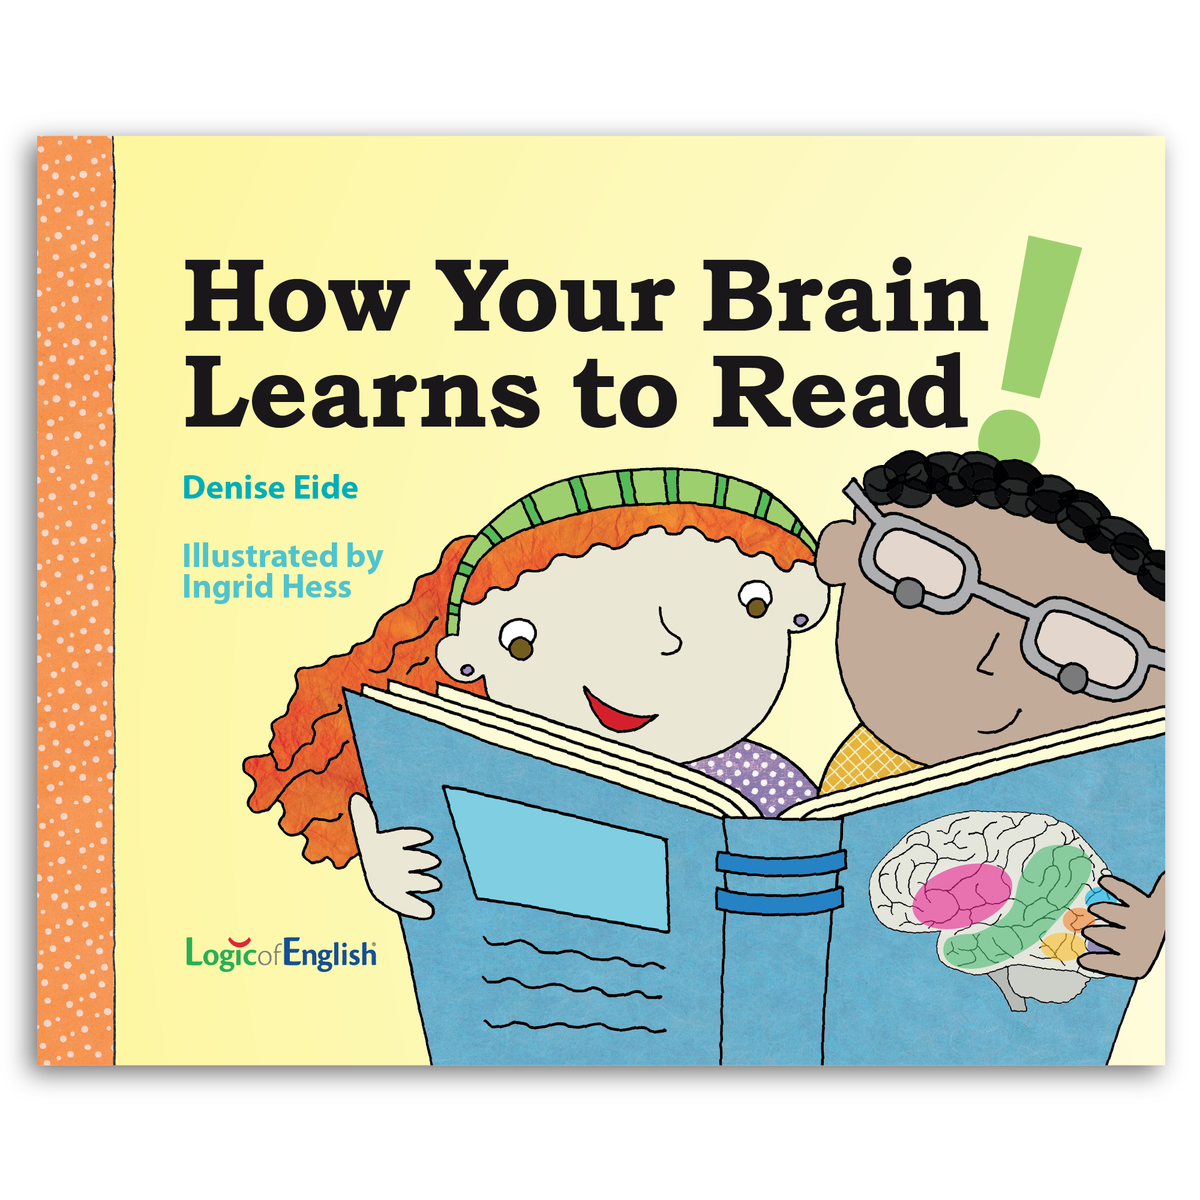 How Your Brain Learns to Read